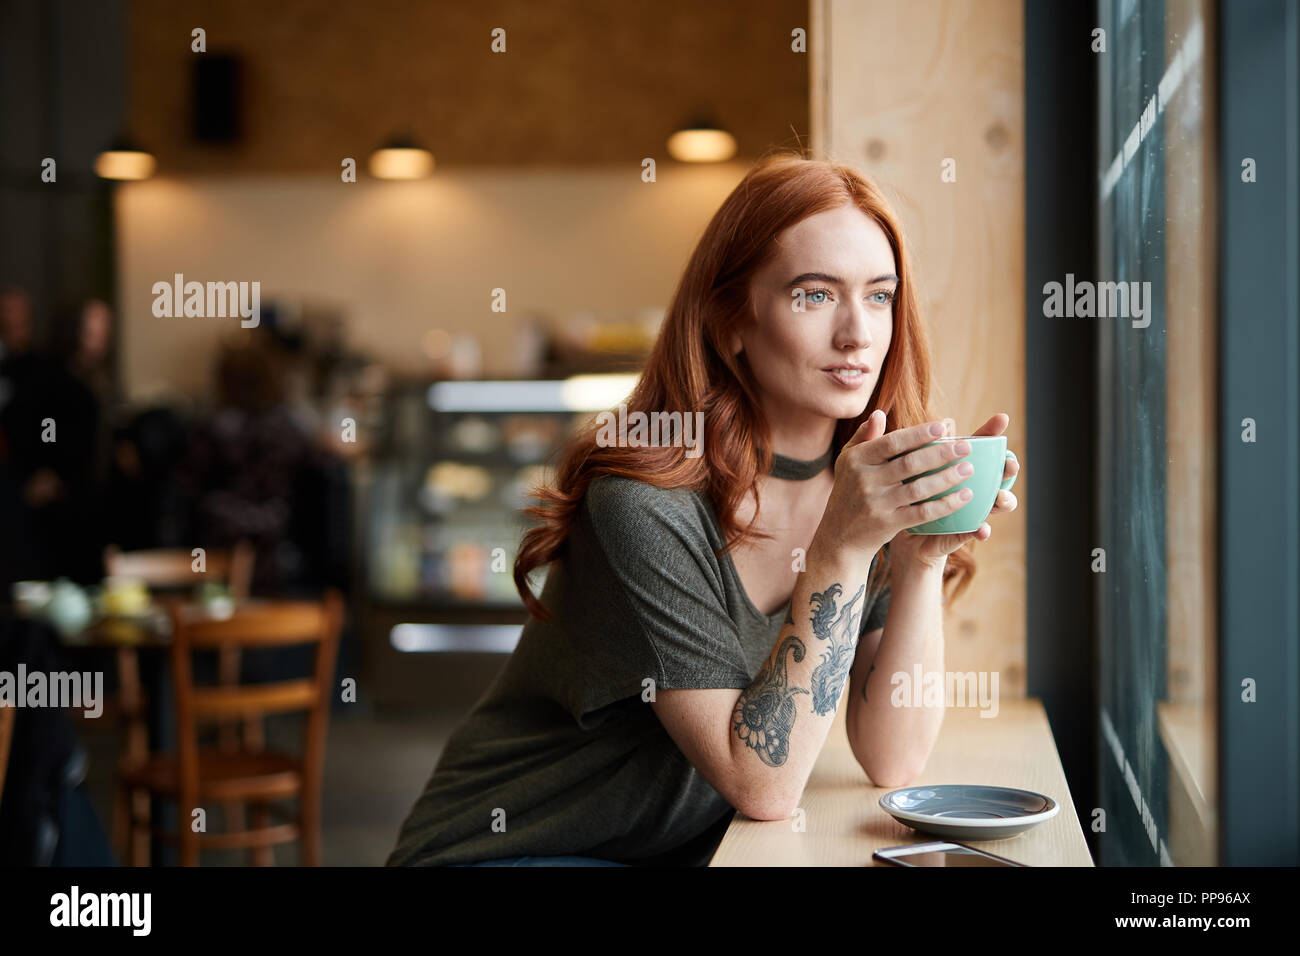 Red Head girl wIth arm Tattoo, sitting alone in a cafe looking through the window, Liverpool, UK Stock Photo